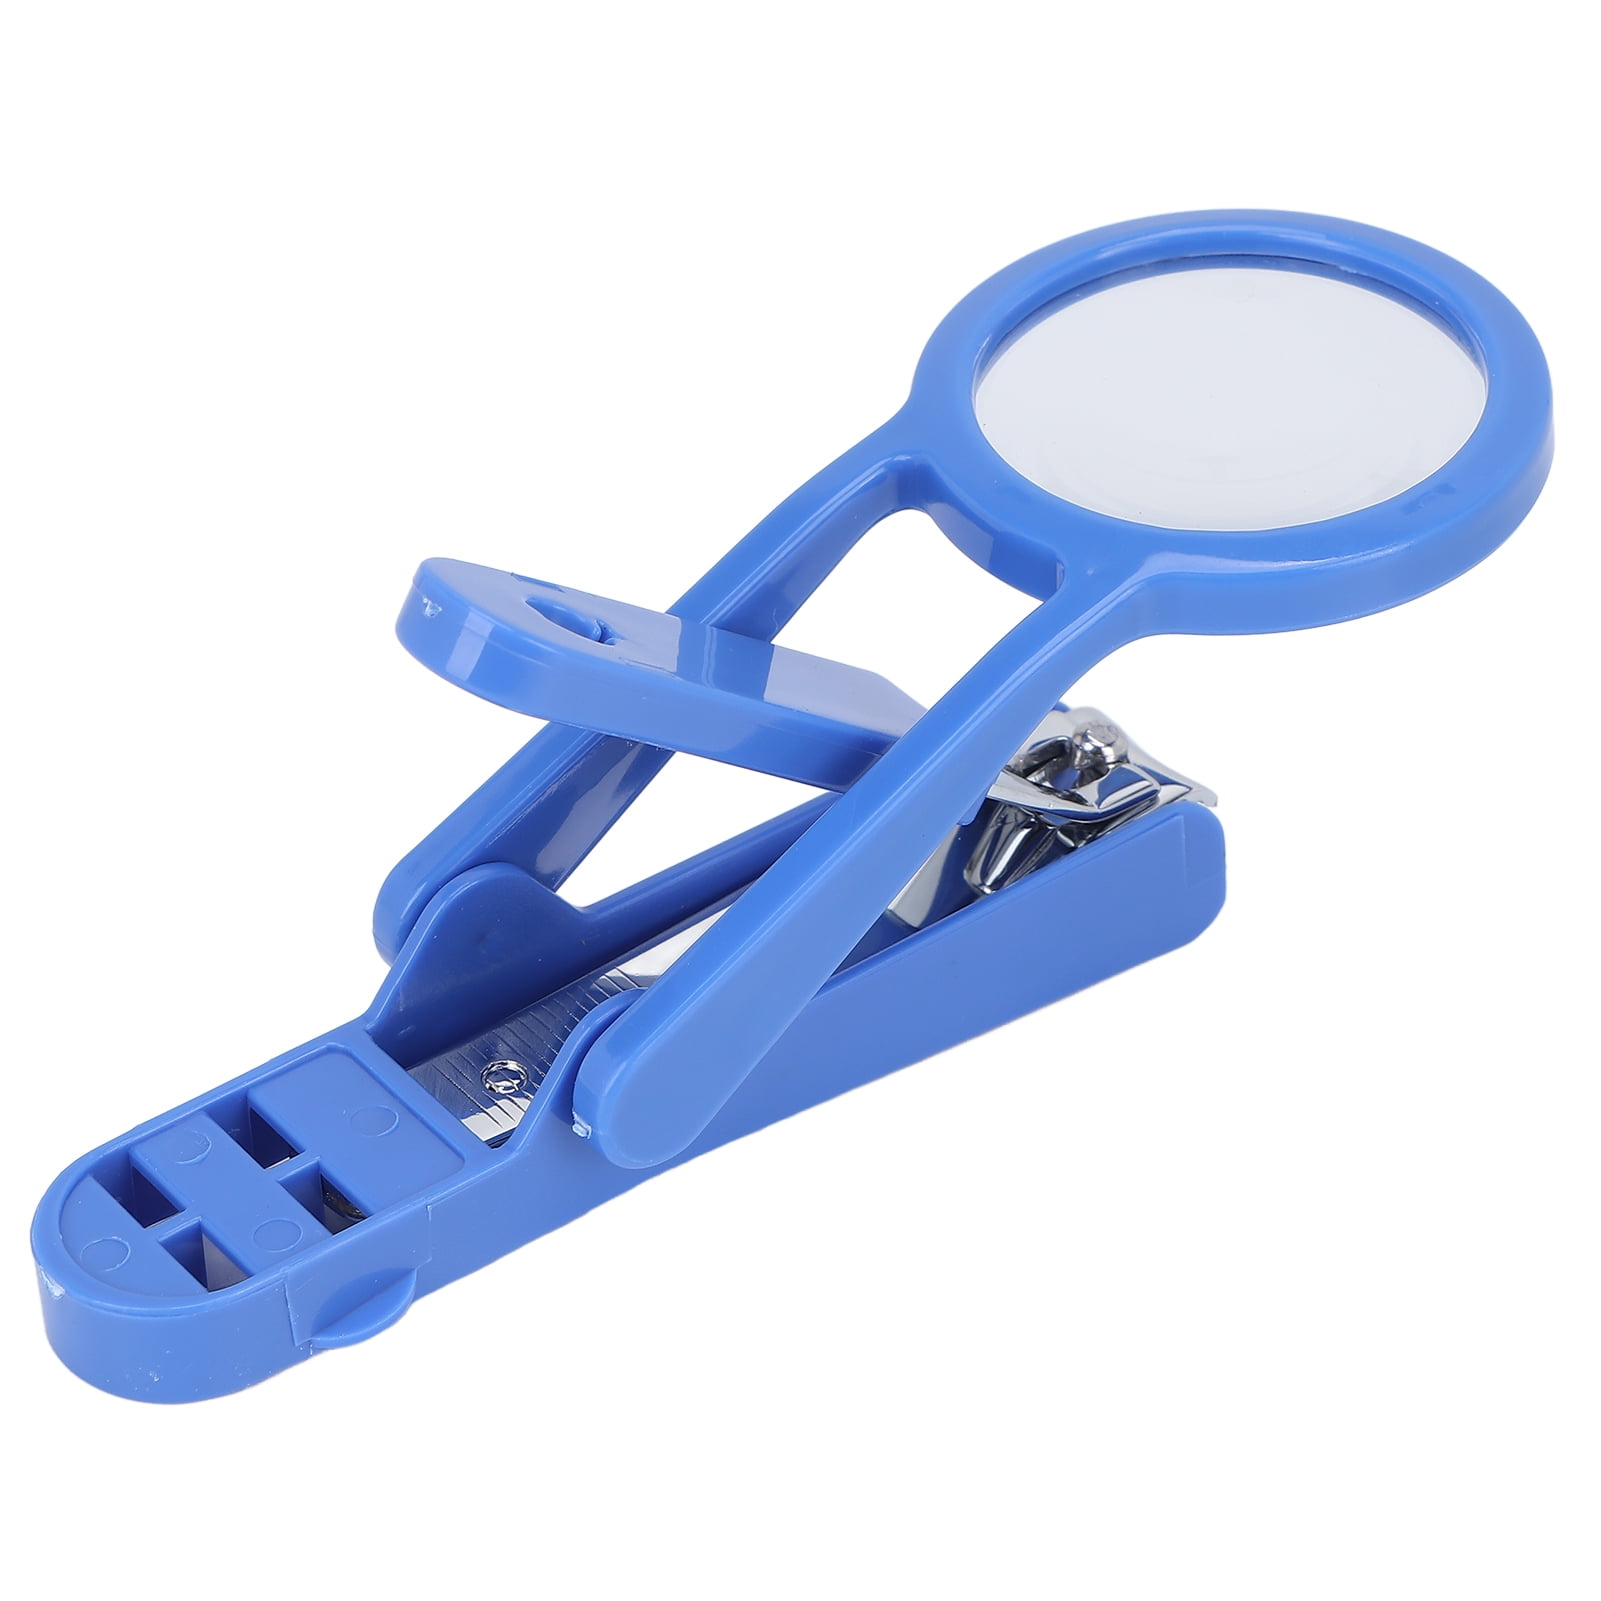 Toe Nail Clipper with Magnifying Lens